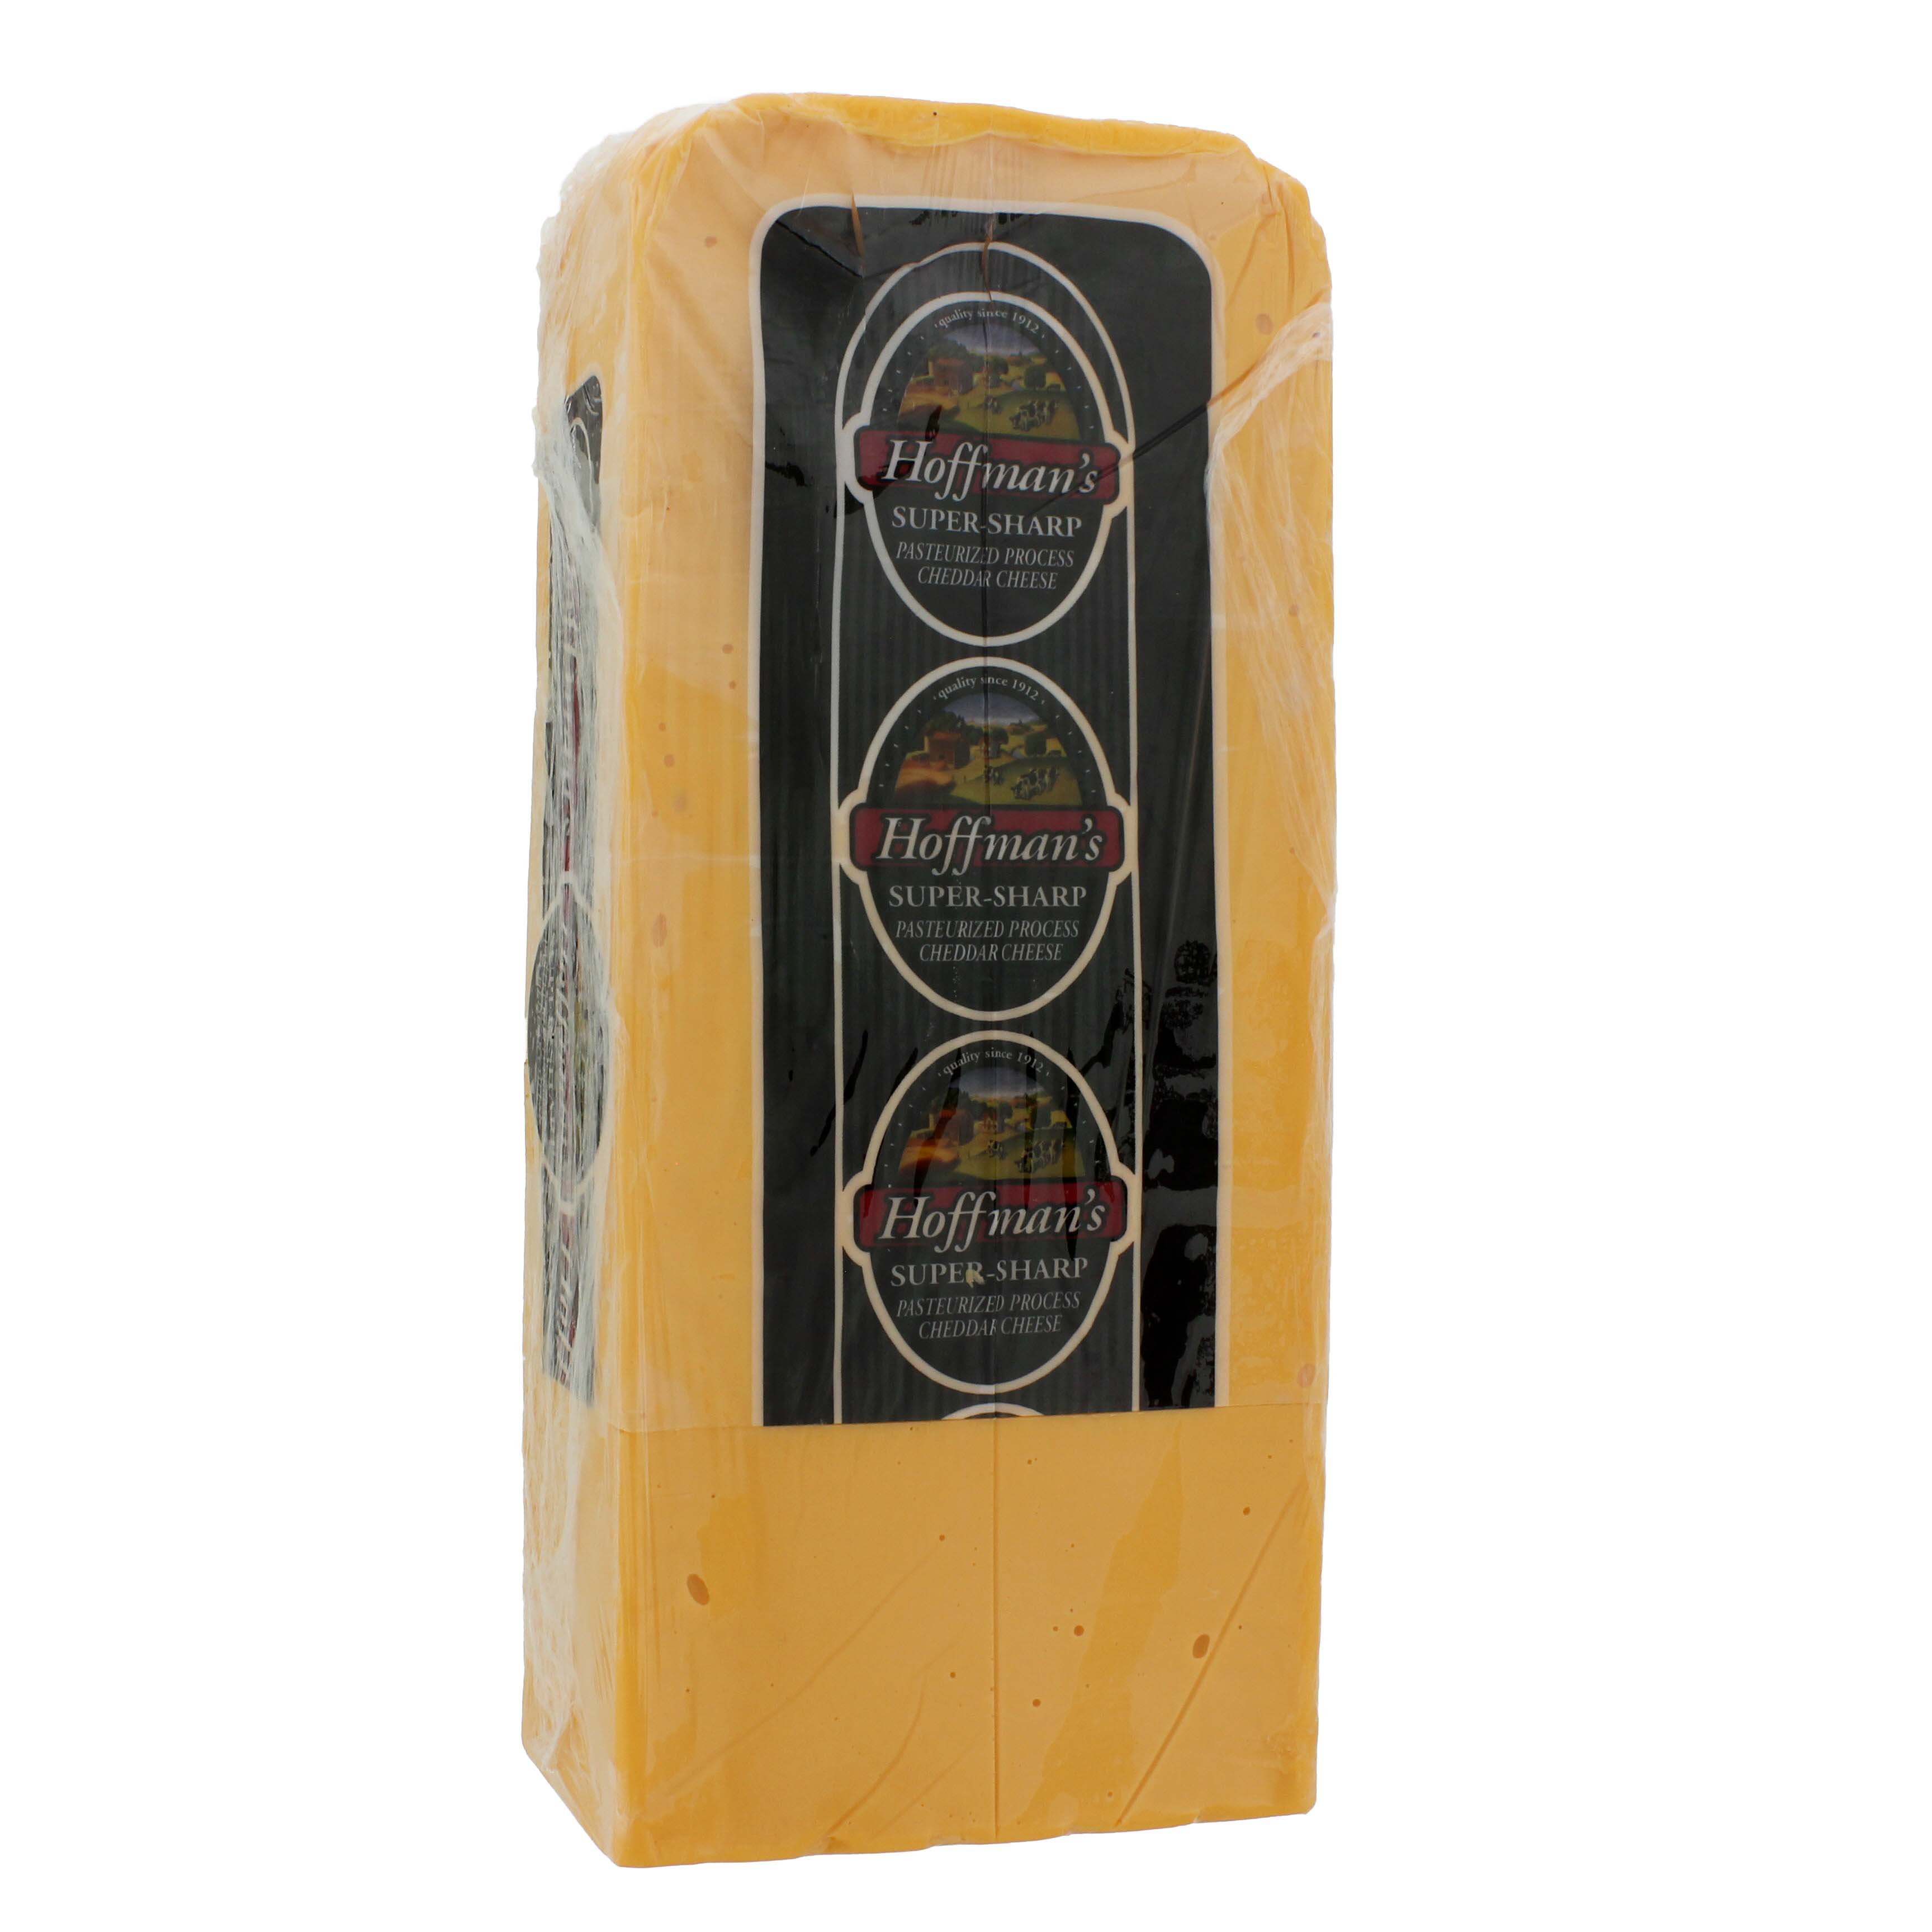 Hoffman's Provel Cheese Loaf, Deli Sliced, Refrigerated